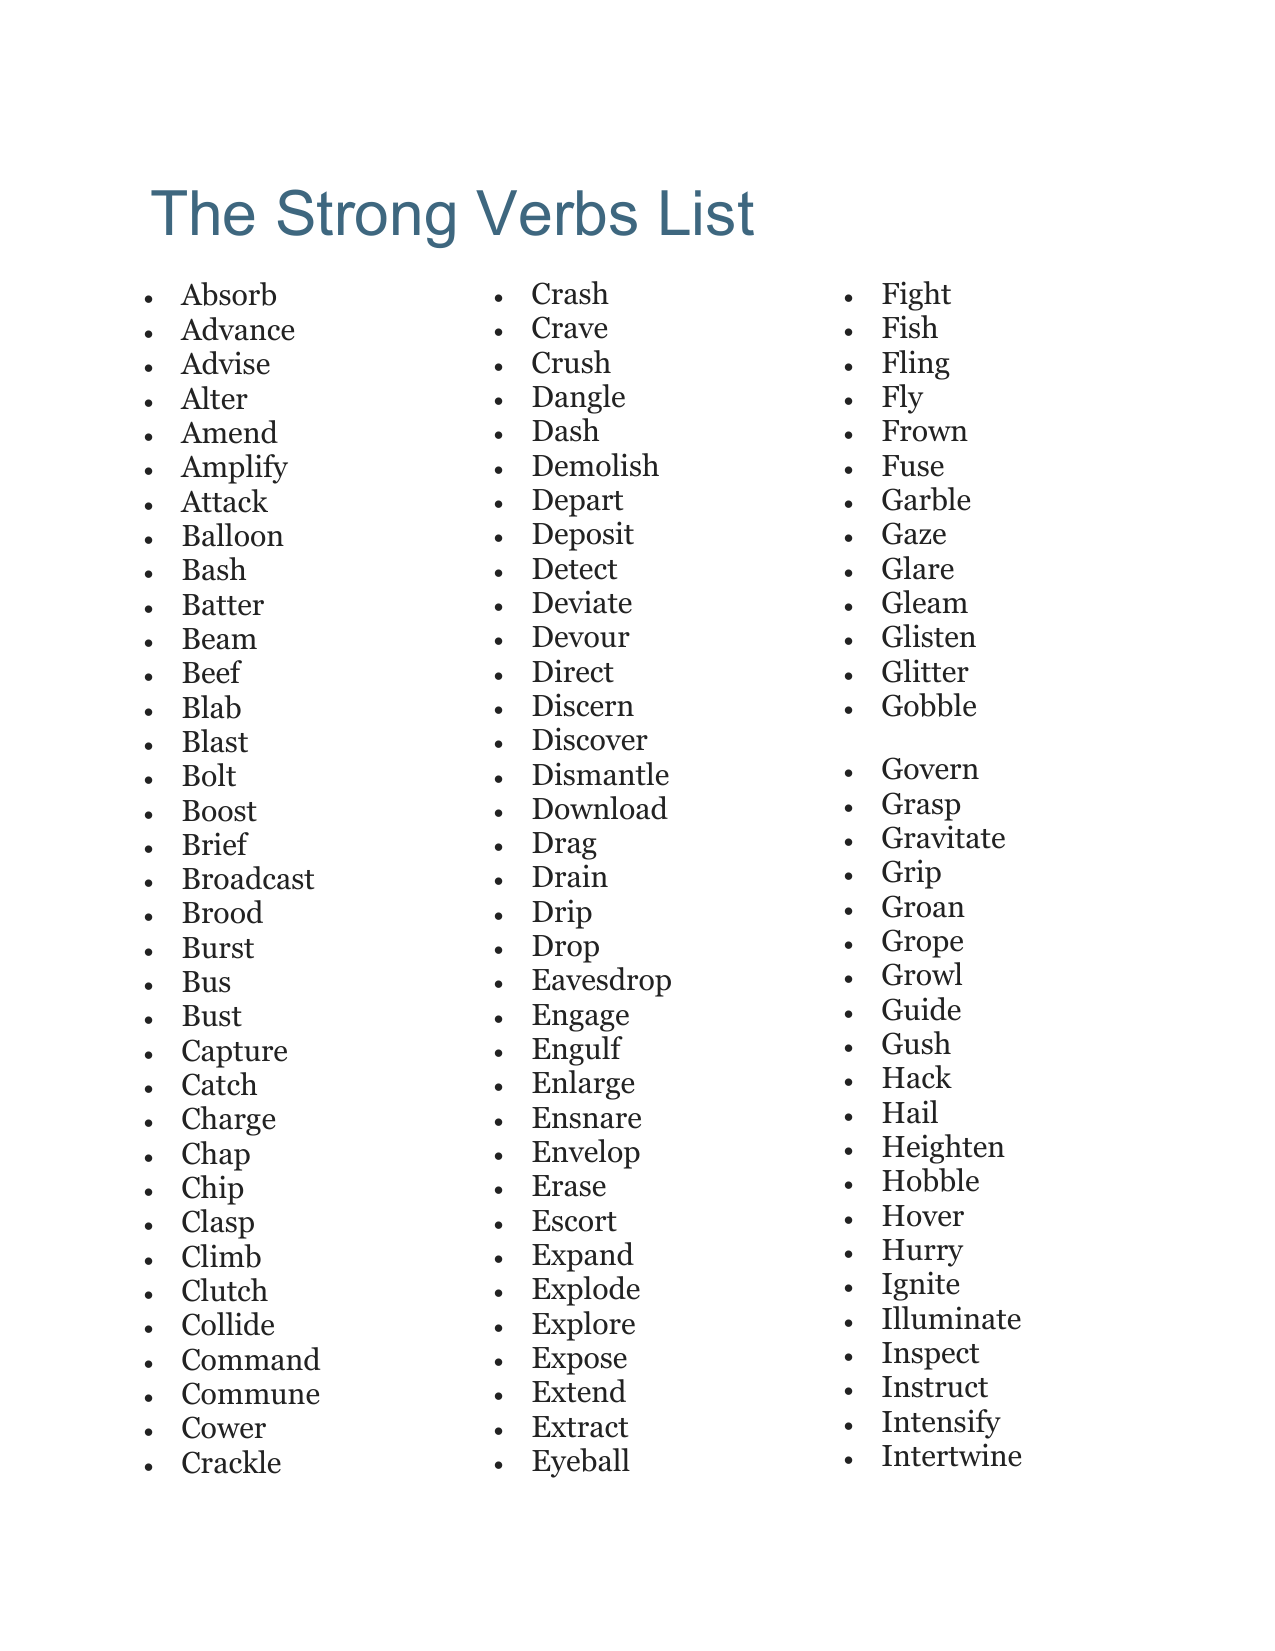 100-strong-verbs-list-of-strong-verbs-in-english-pdf-engdic